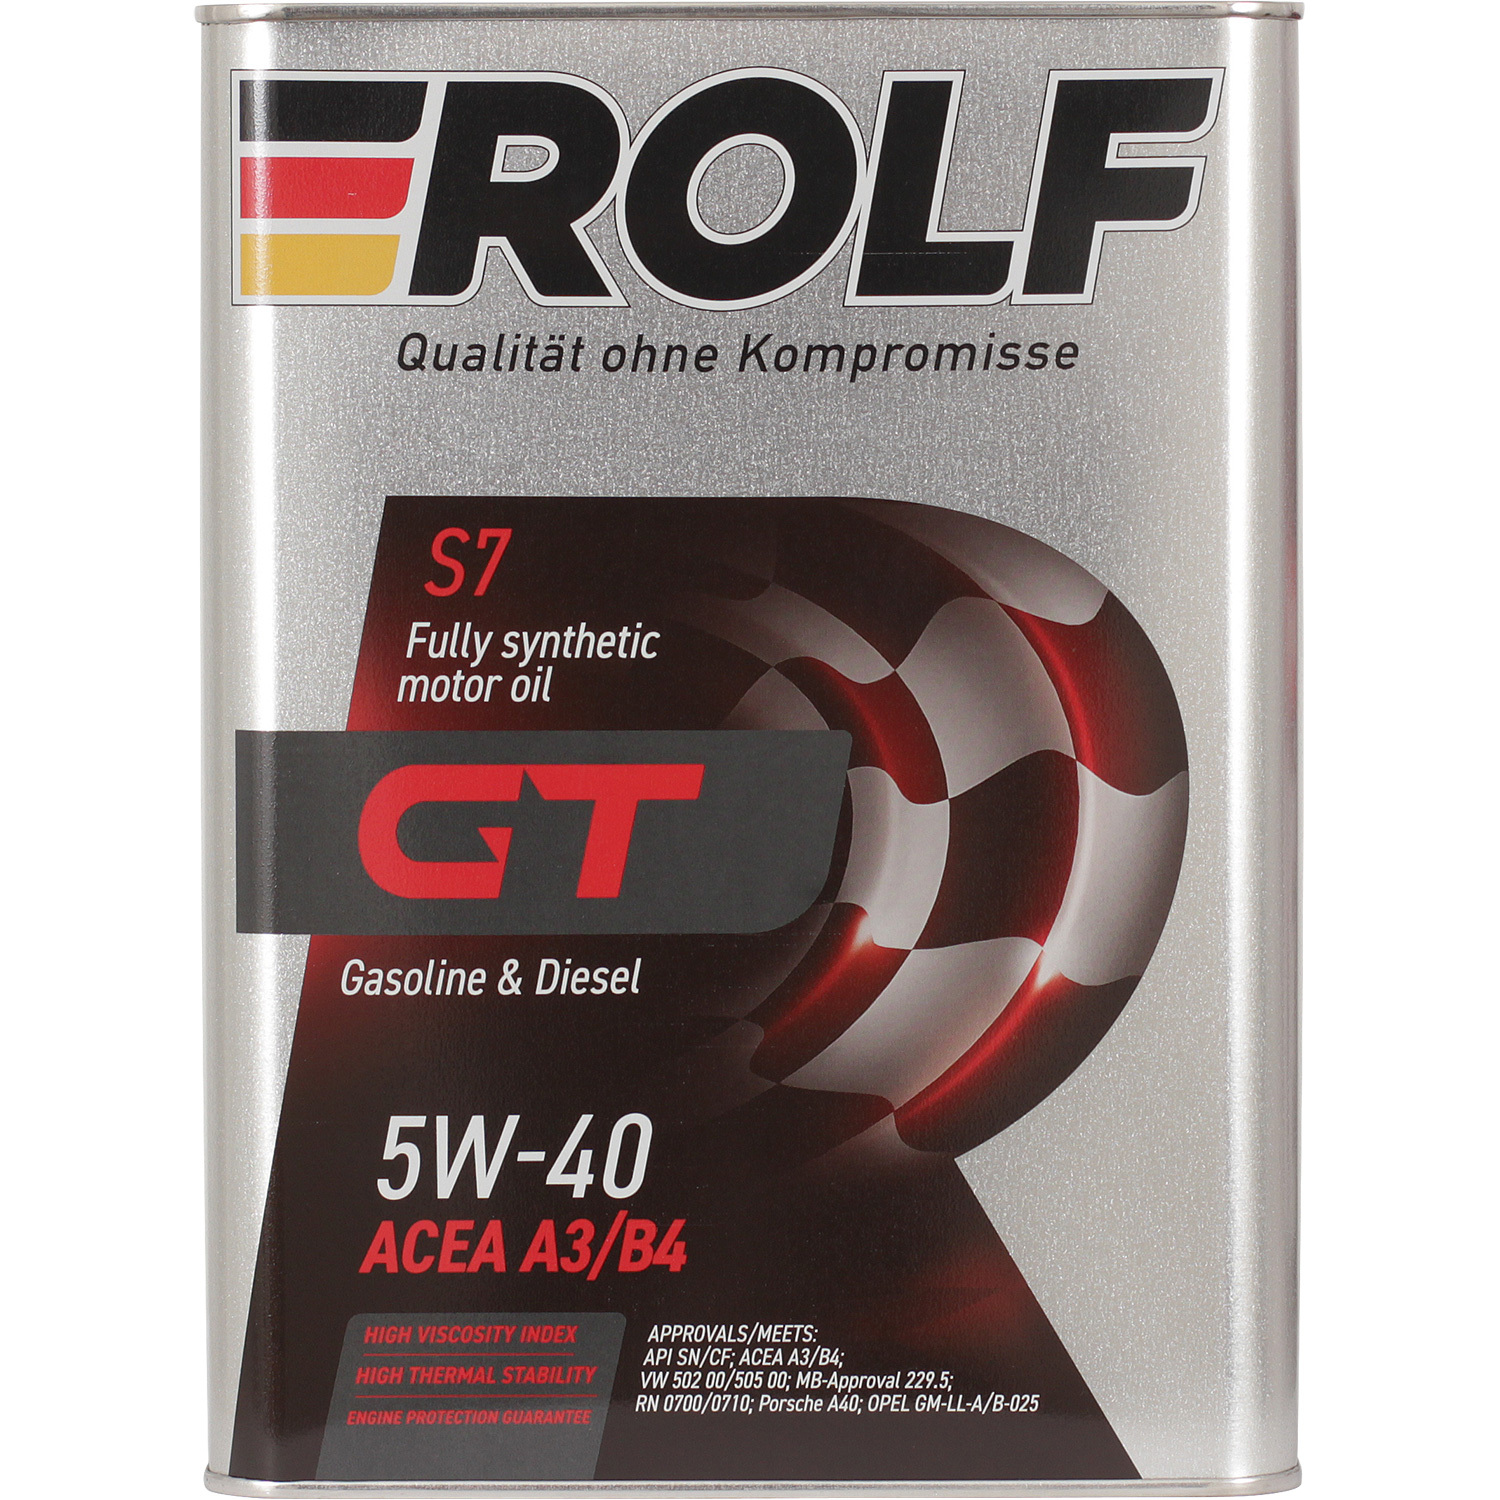 Rolf Моторное масло Rolf GT 5W-40, 4 л масло моторное rolf gt 5w40 синтетическое 1 л